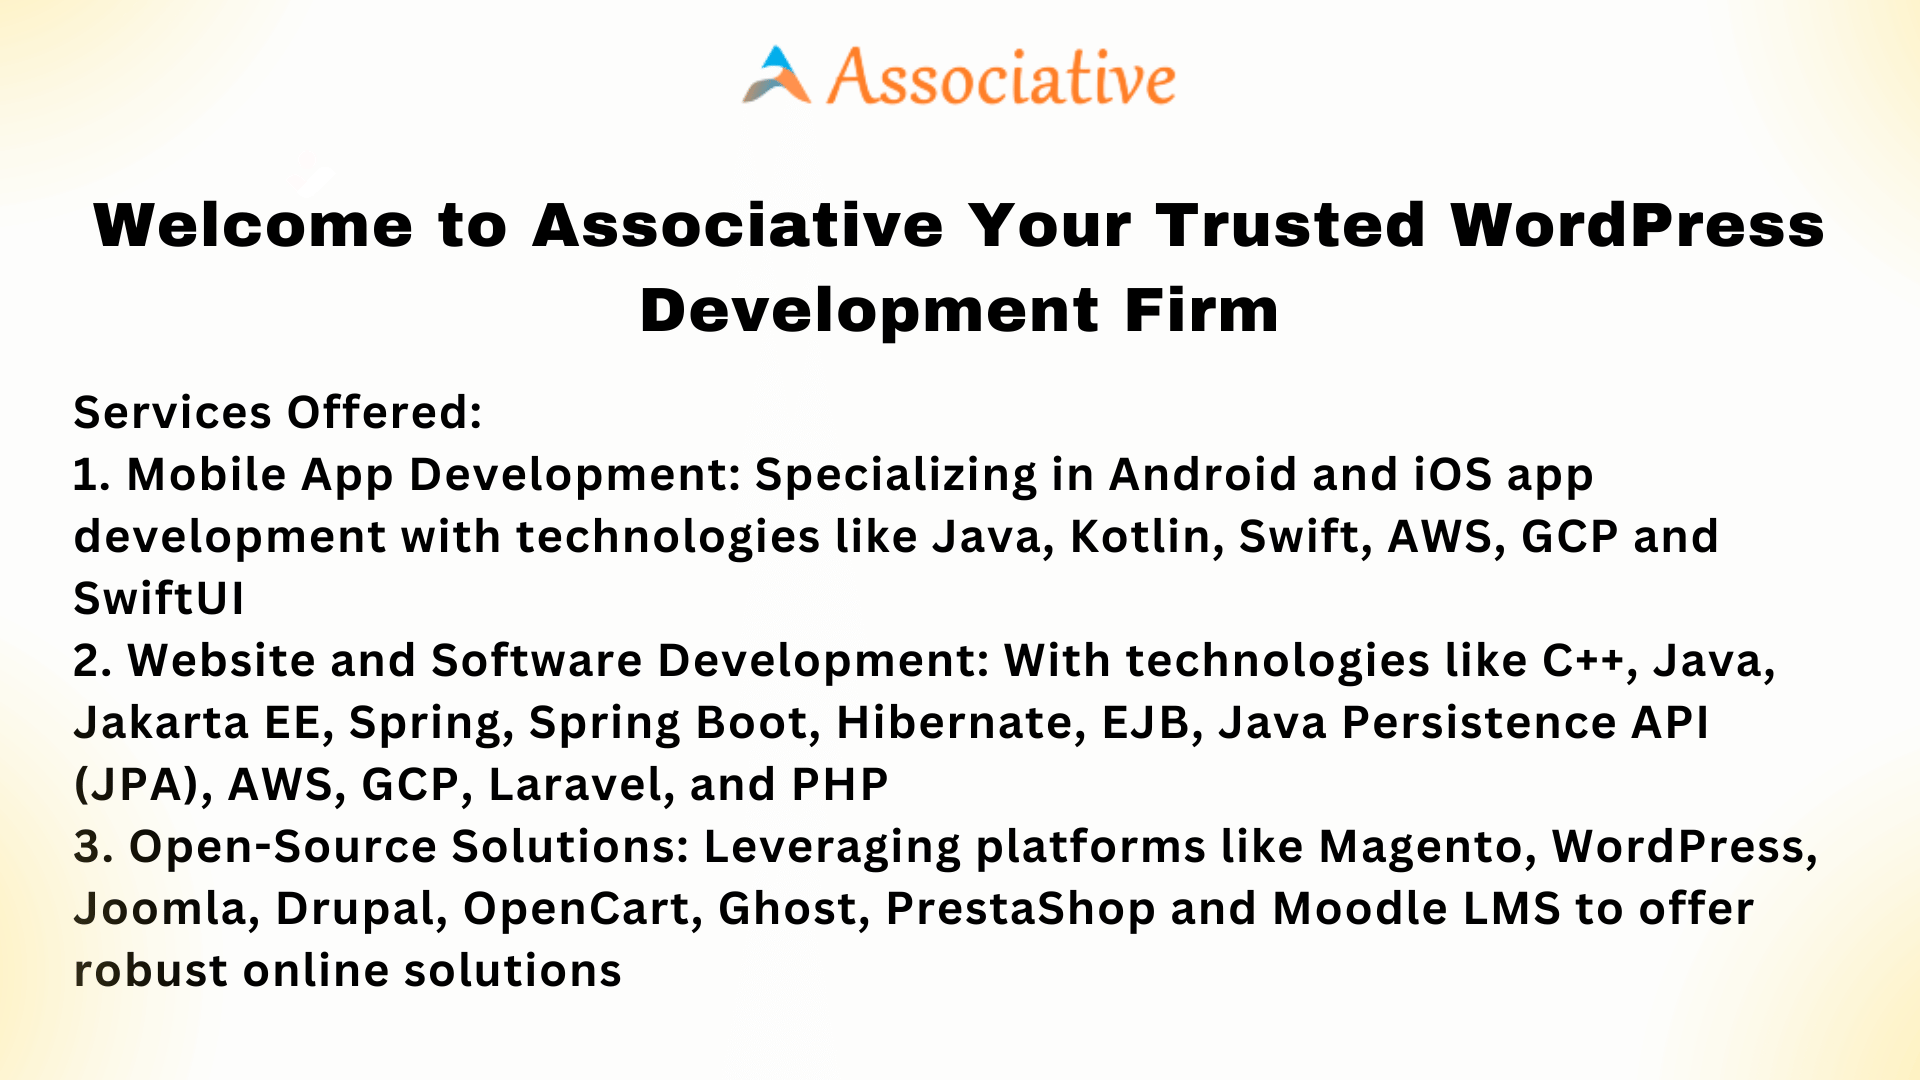 Welcome to Associative Your Trusted WordPress Development Firm